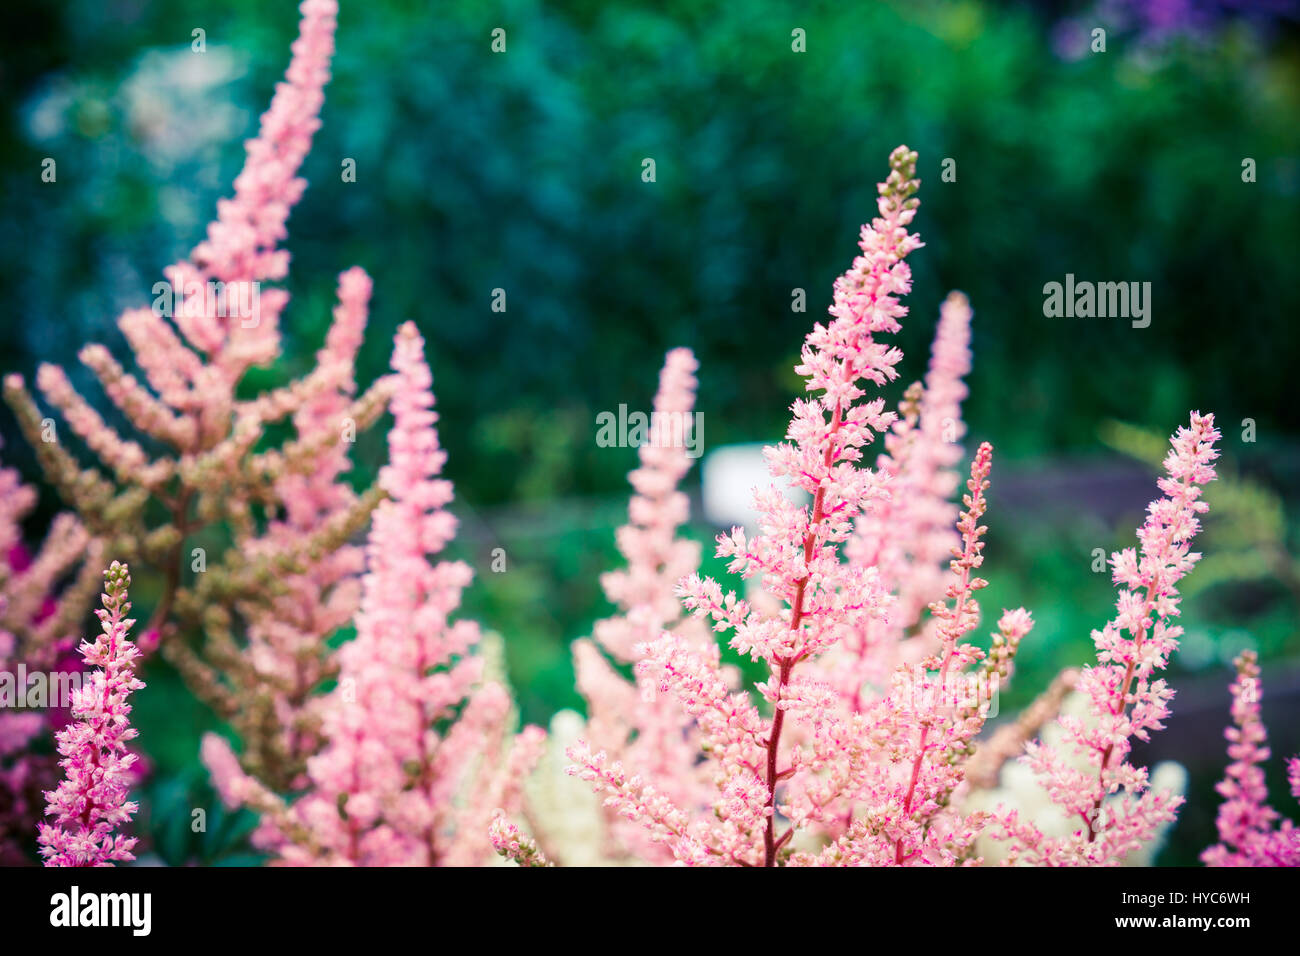 Astilbe flowers growing in the garden. Shallow depth of field. Stock Photo